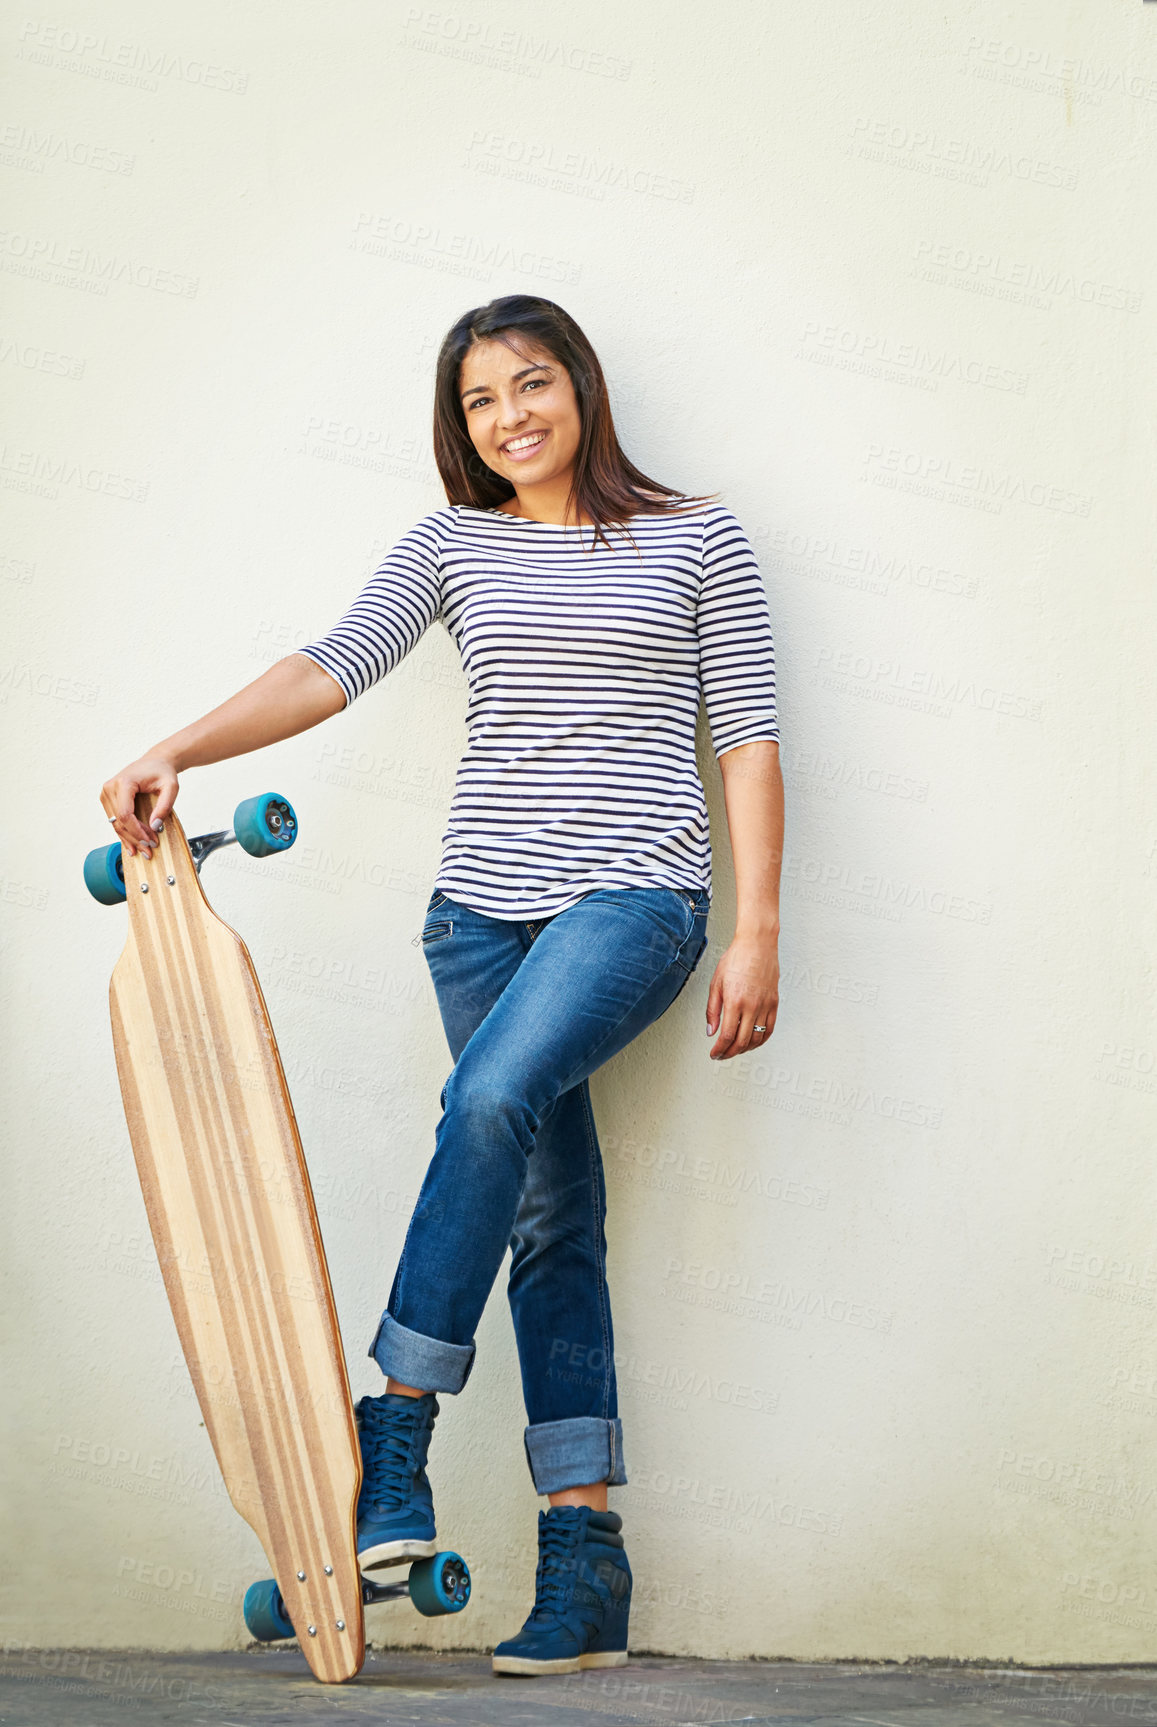 Buy stock photo Shot of a young skater standing against a wall with her longboard